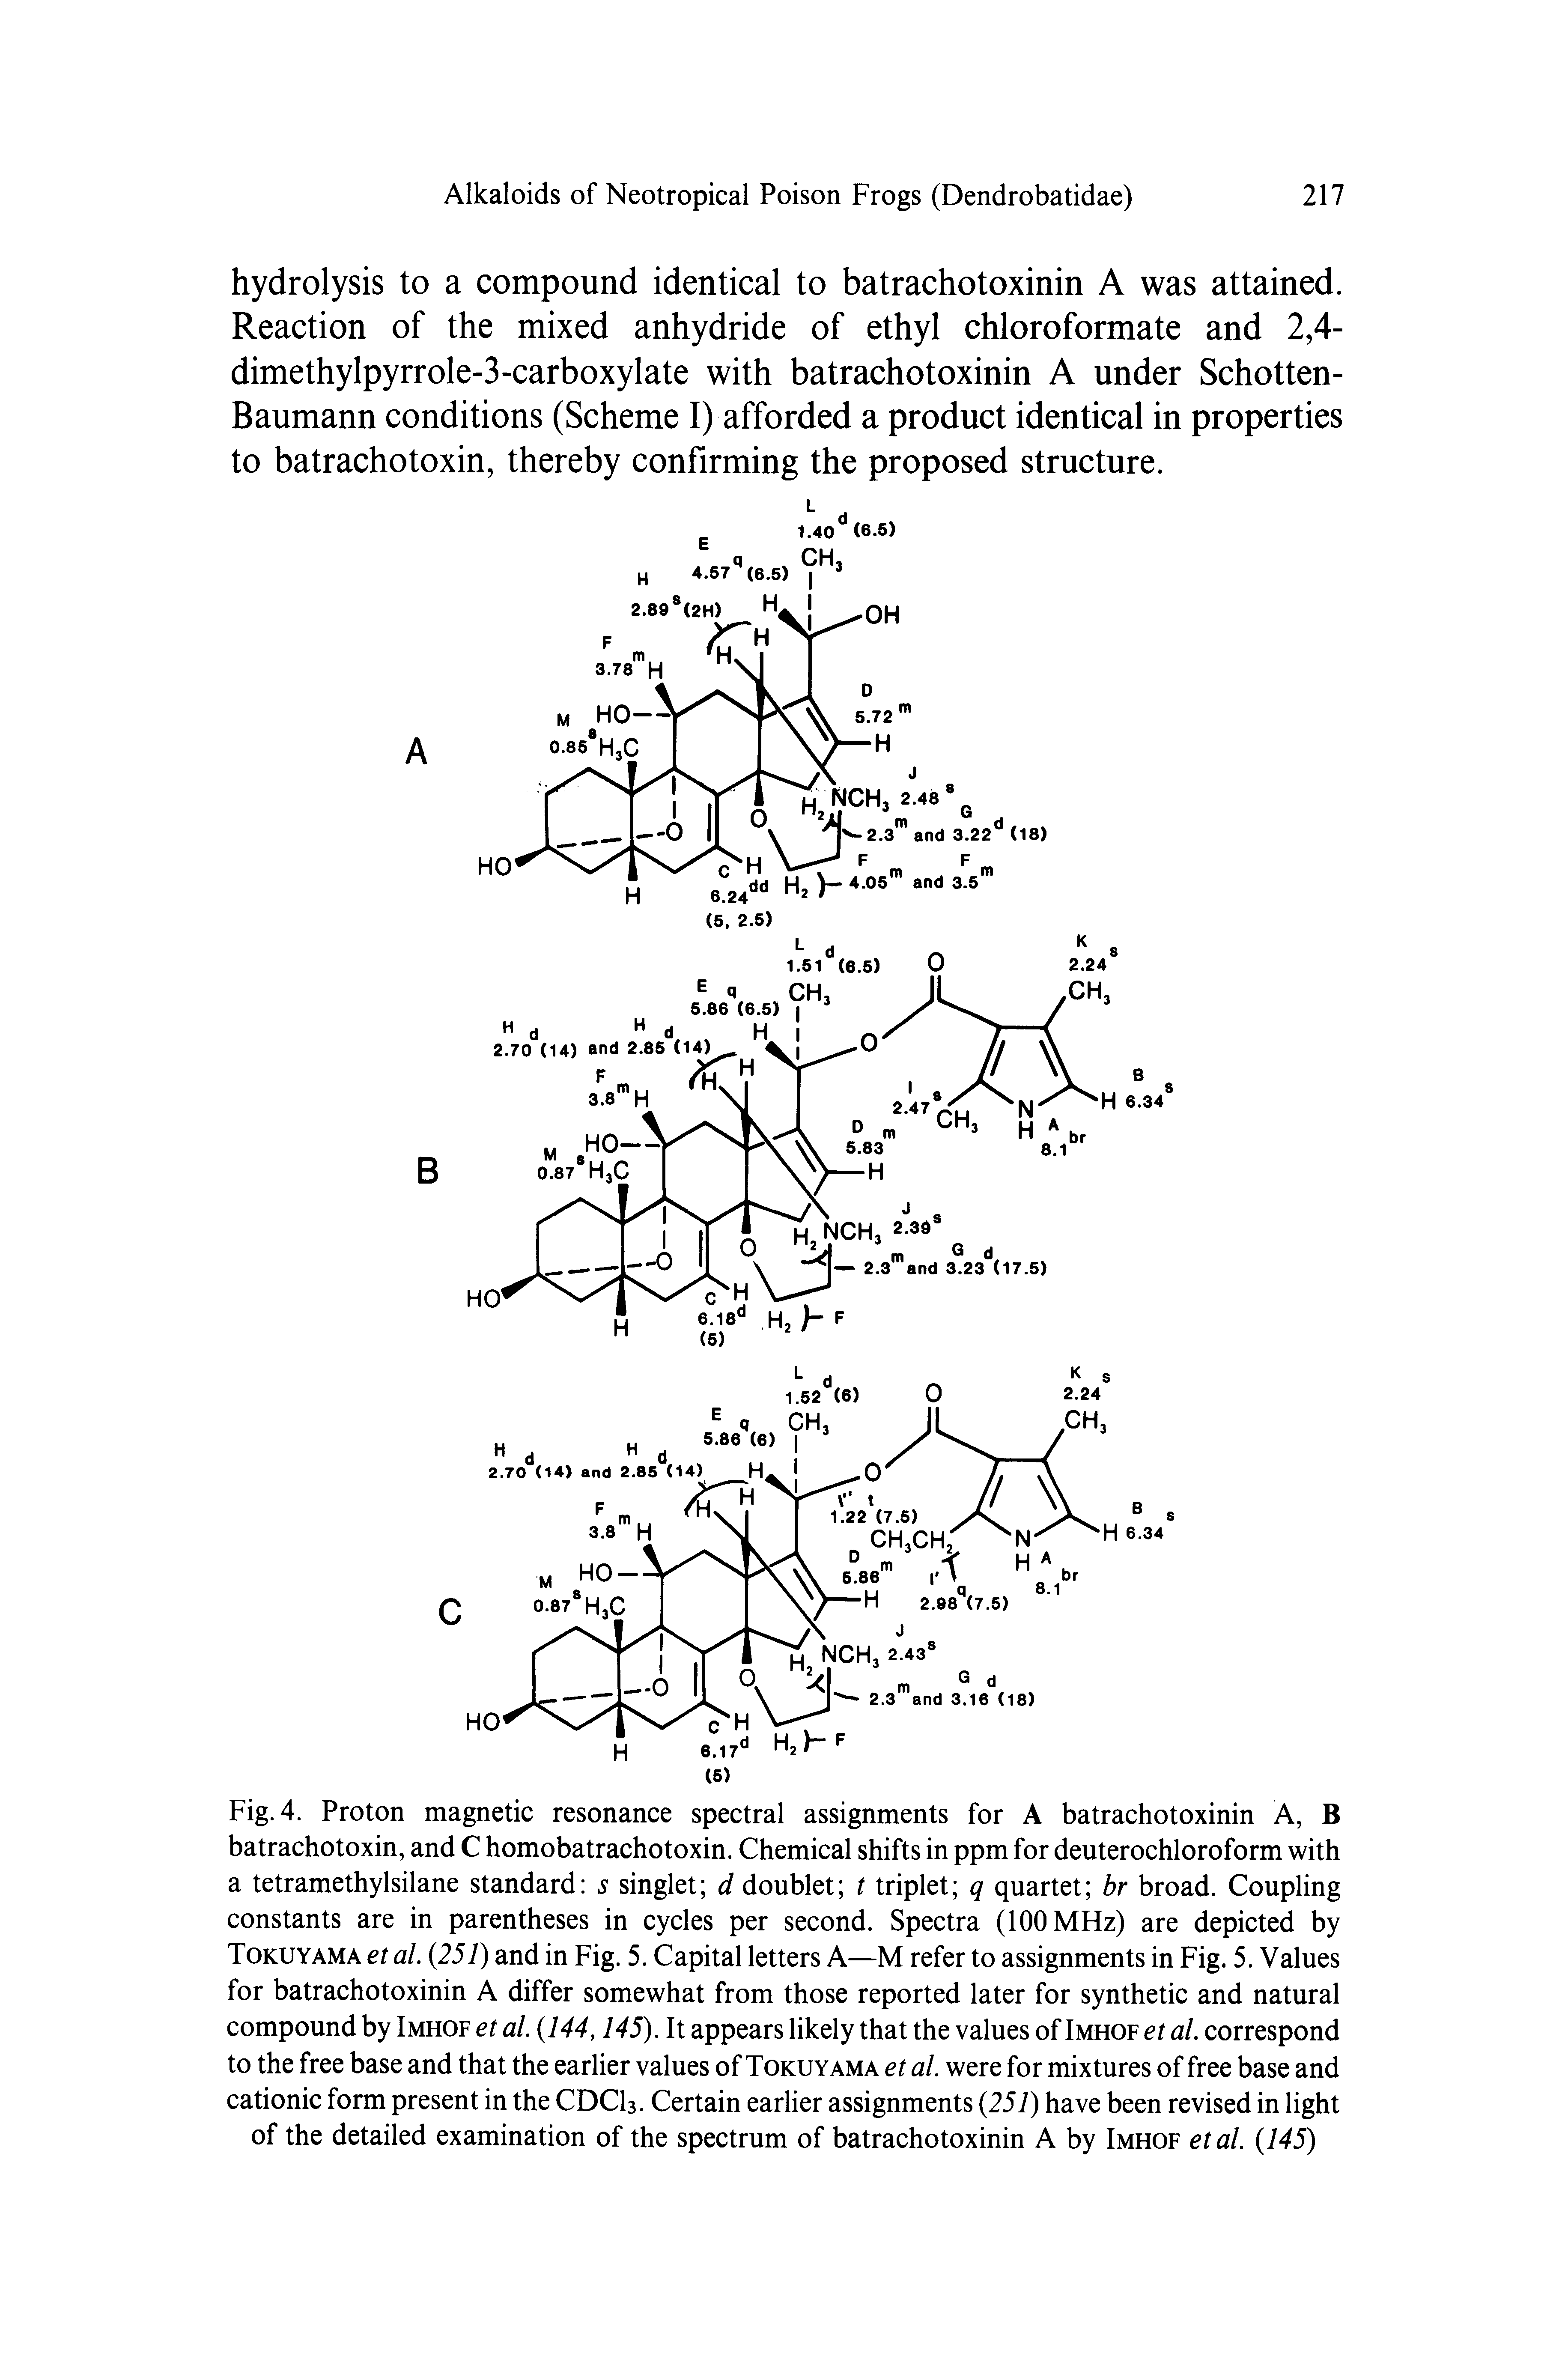 Fig. 4. Proton magnetic resonance spectral assignments for A batrachotoxinin A, B batrachotoxin, and C homobatrachotoxin. Chemical shifts in ppm for deuterochloroform with a tetramethylsilane standard s singlet d doublet t triplet q quartet br broad. Coupling constants are in parentheses in cycles per second. Spectra (100 MHz) are depicted by Tokuyama et al. (251) and in Fig. 5. Capital letters A—M refer to assignments in Fig. 5. Values for batrachotoxinin A differ somewhat from those reported later for synthetic and natural compound by Imhof et al. (144,145). It appears likely that the values of Imhof et al. correspond to the free base and that the earlier values of Tokuyama et al. were for mixtures of free base and cationic form present in the CDCI3. Certain earlier assignments (257) have been revised in light of the detailed examination of the spectrum of batrachotoxinin A by Imhof etal. (145)...